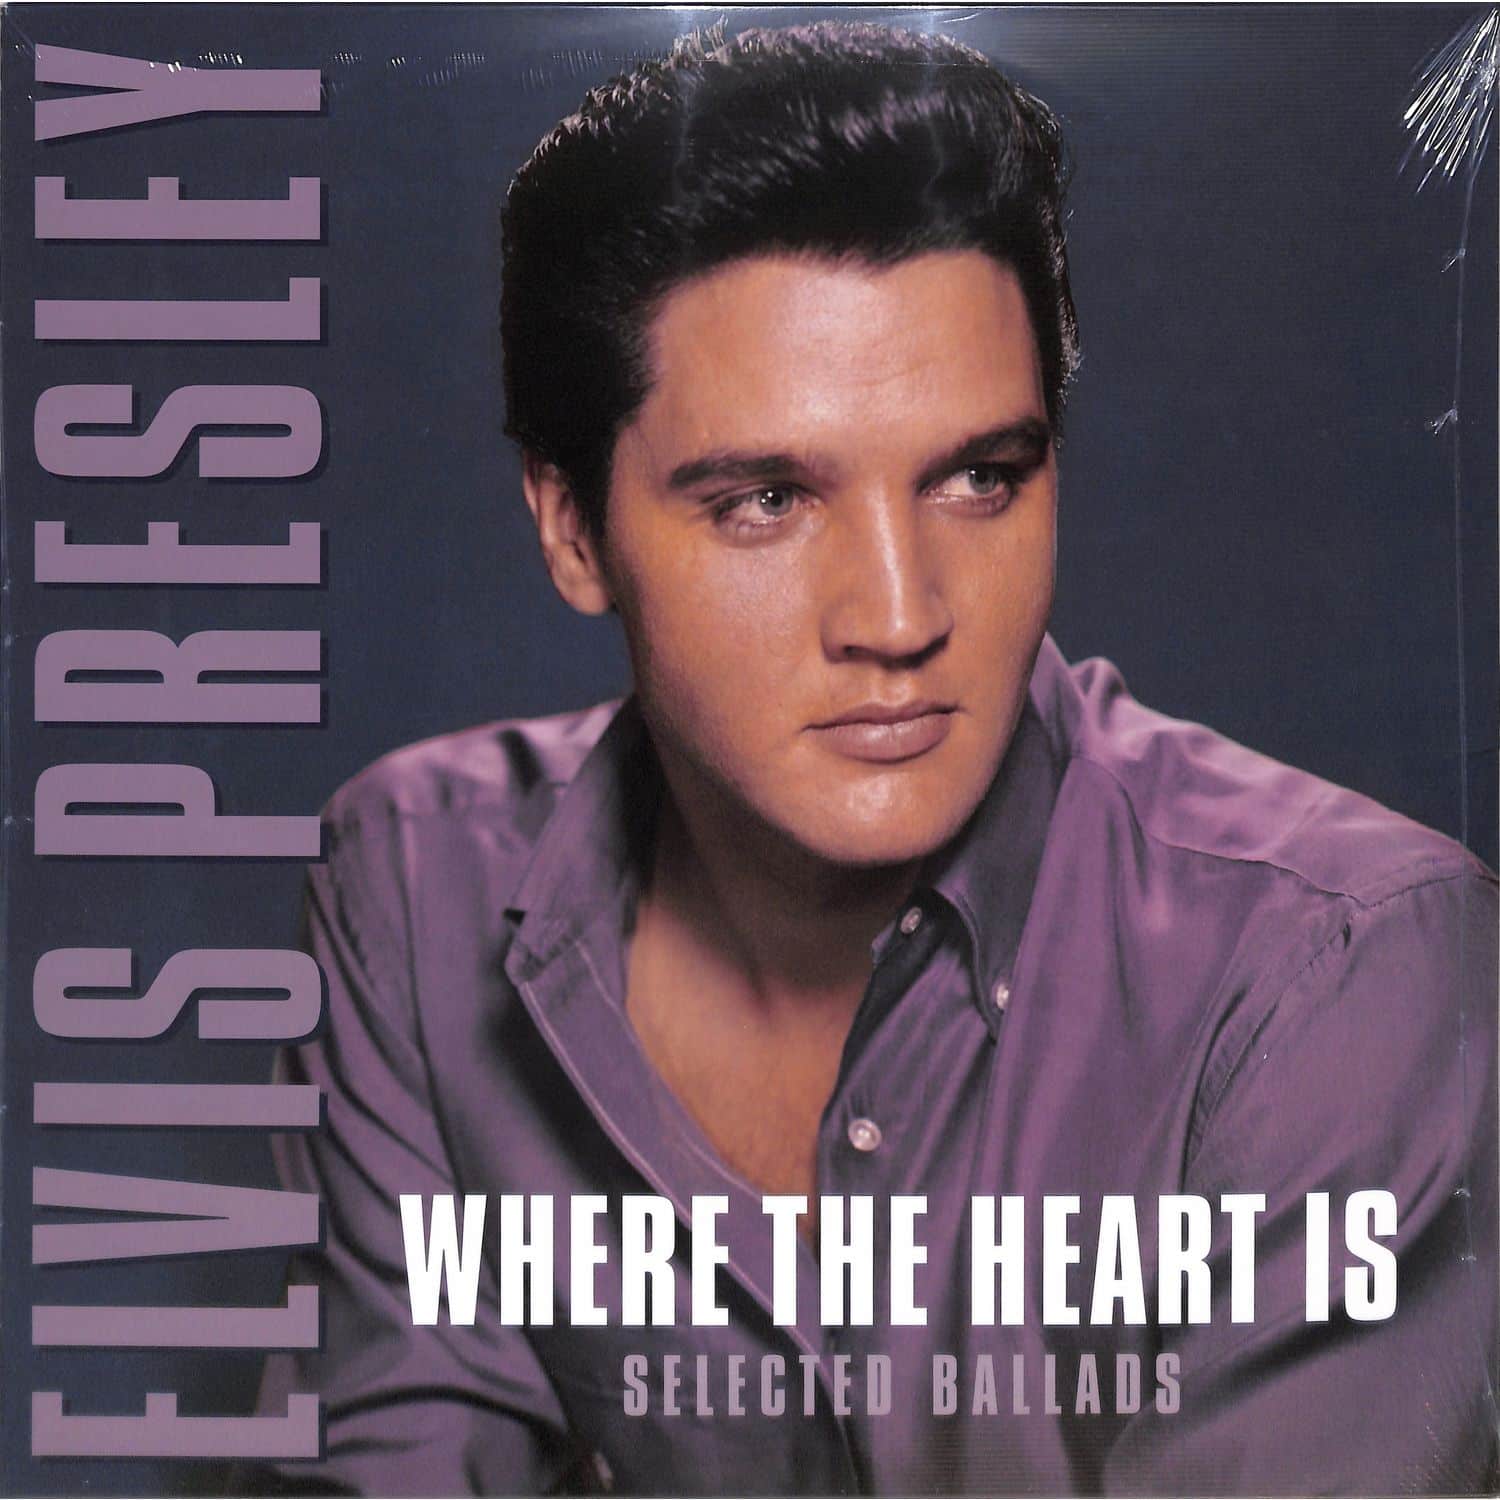 Elvis Presley - WHERE THE HEART IS 